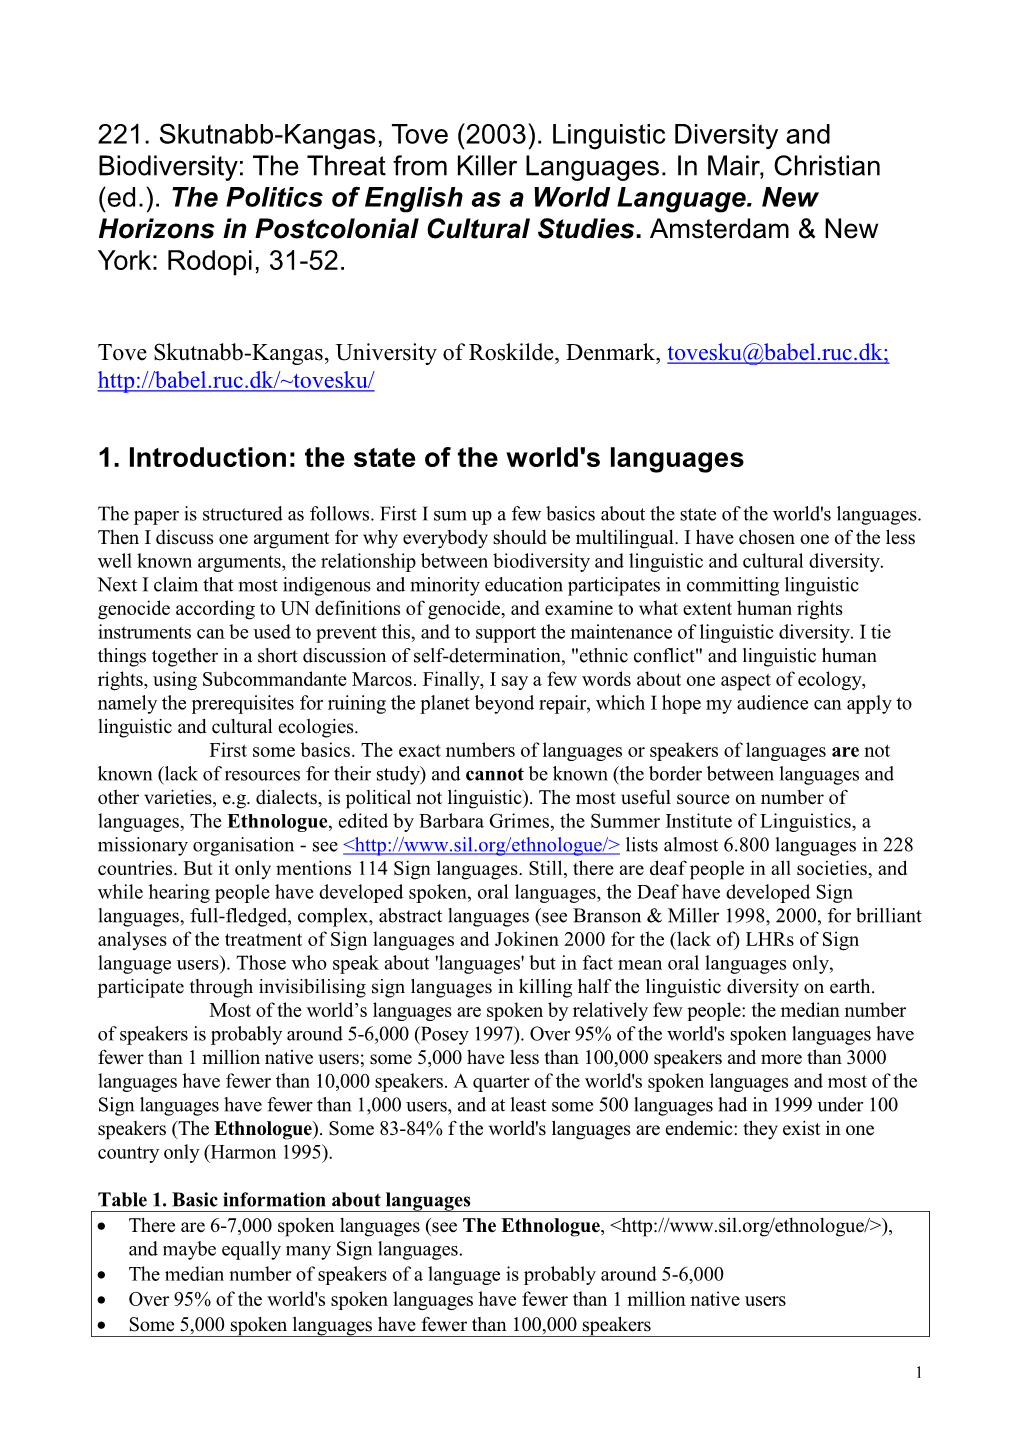 (2003). Linguistic Diversity and Biodiversity: the Threat from Killer Languages